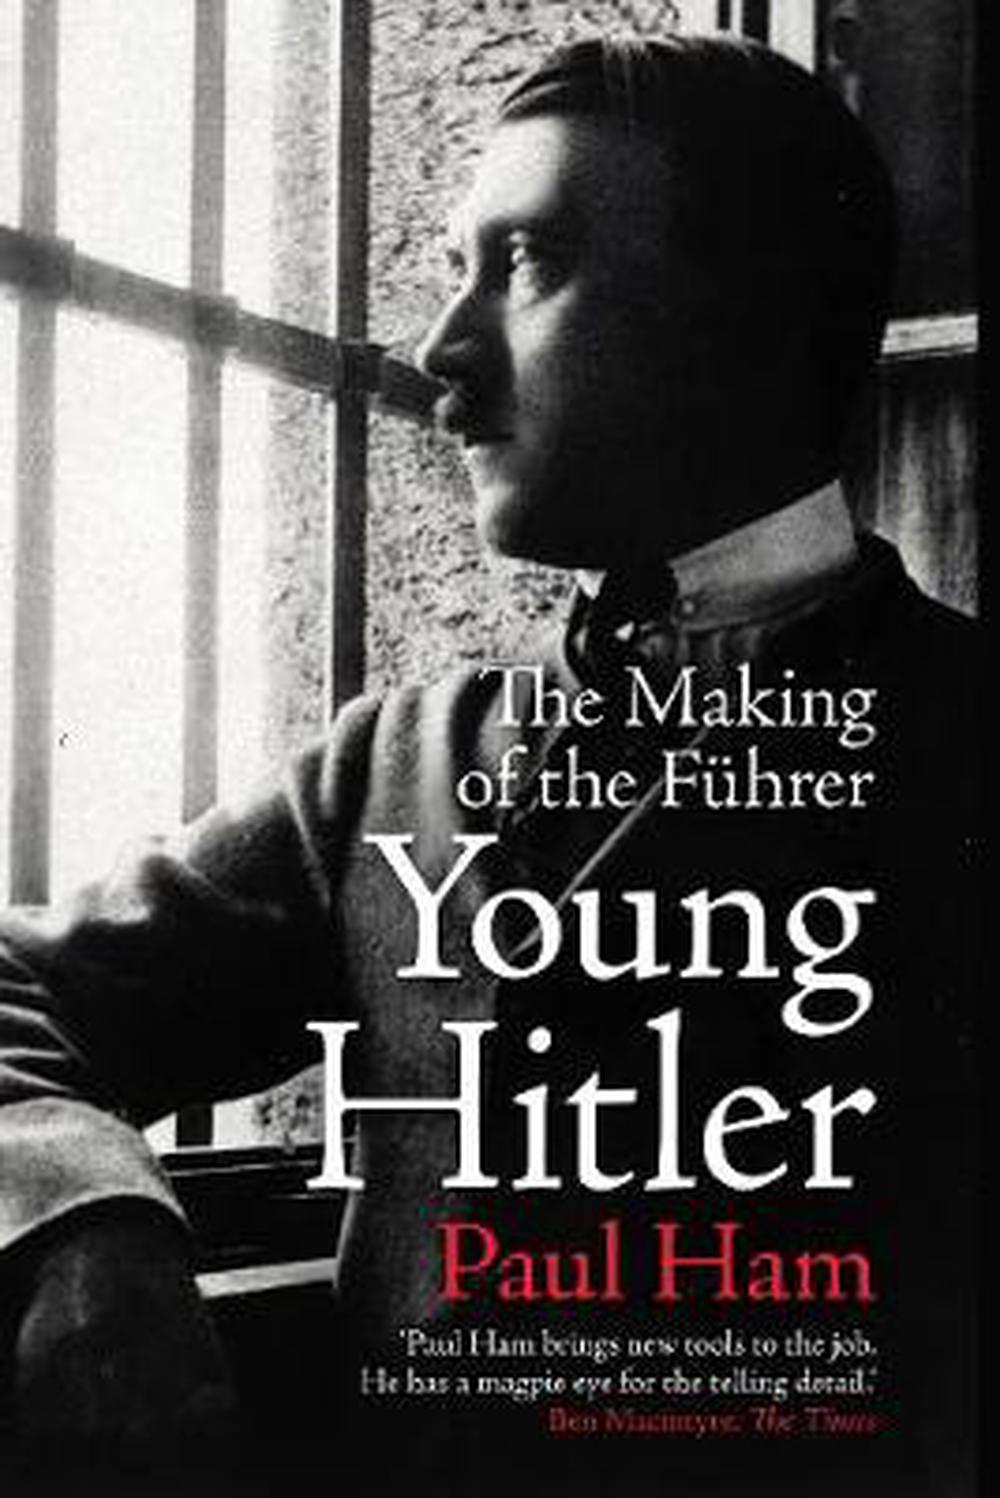 Young Hitler by Paul Ham, Hardcover, 9780857524836 | Buy online at The Nile